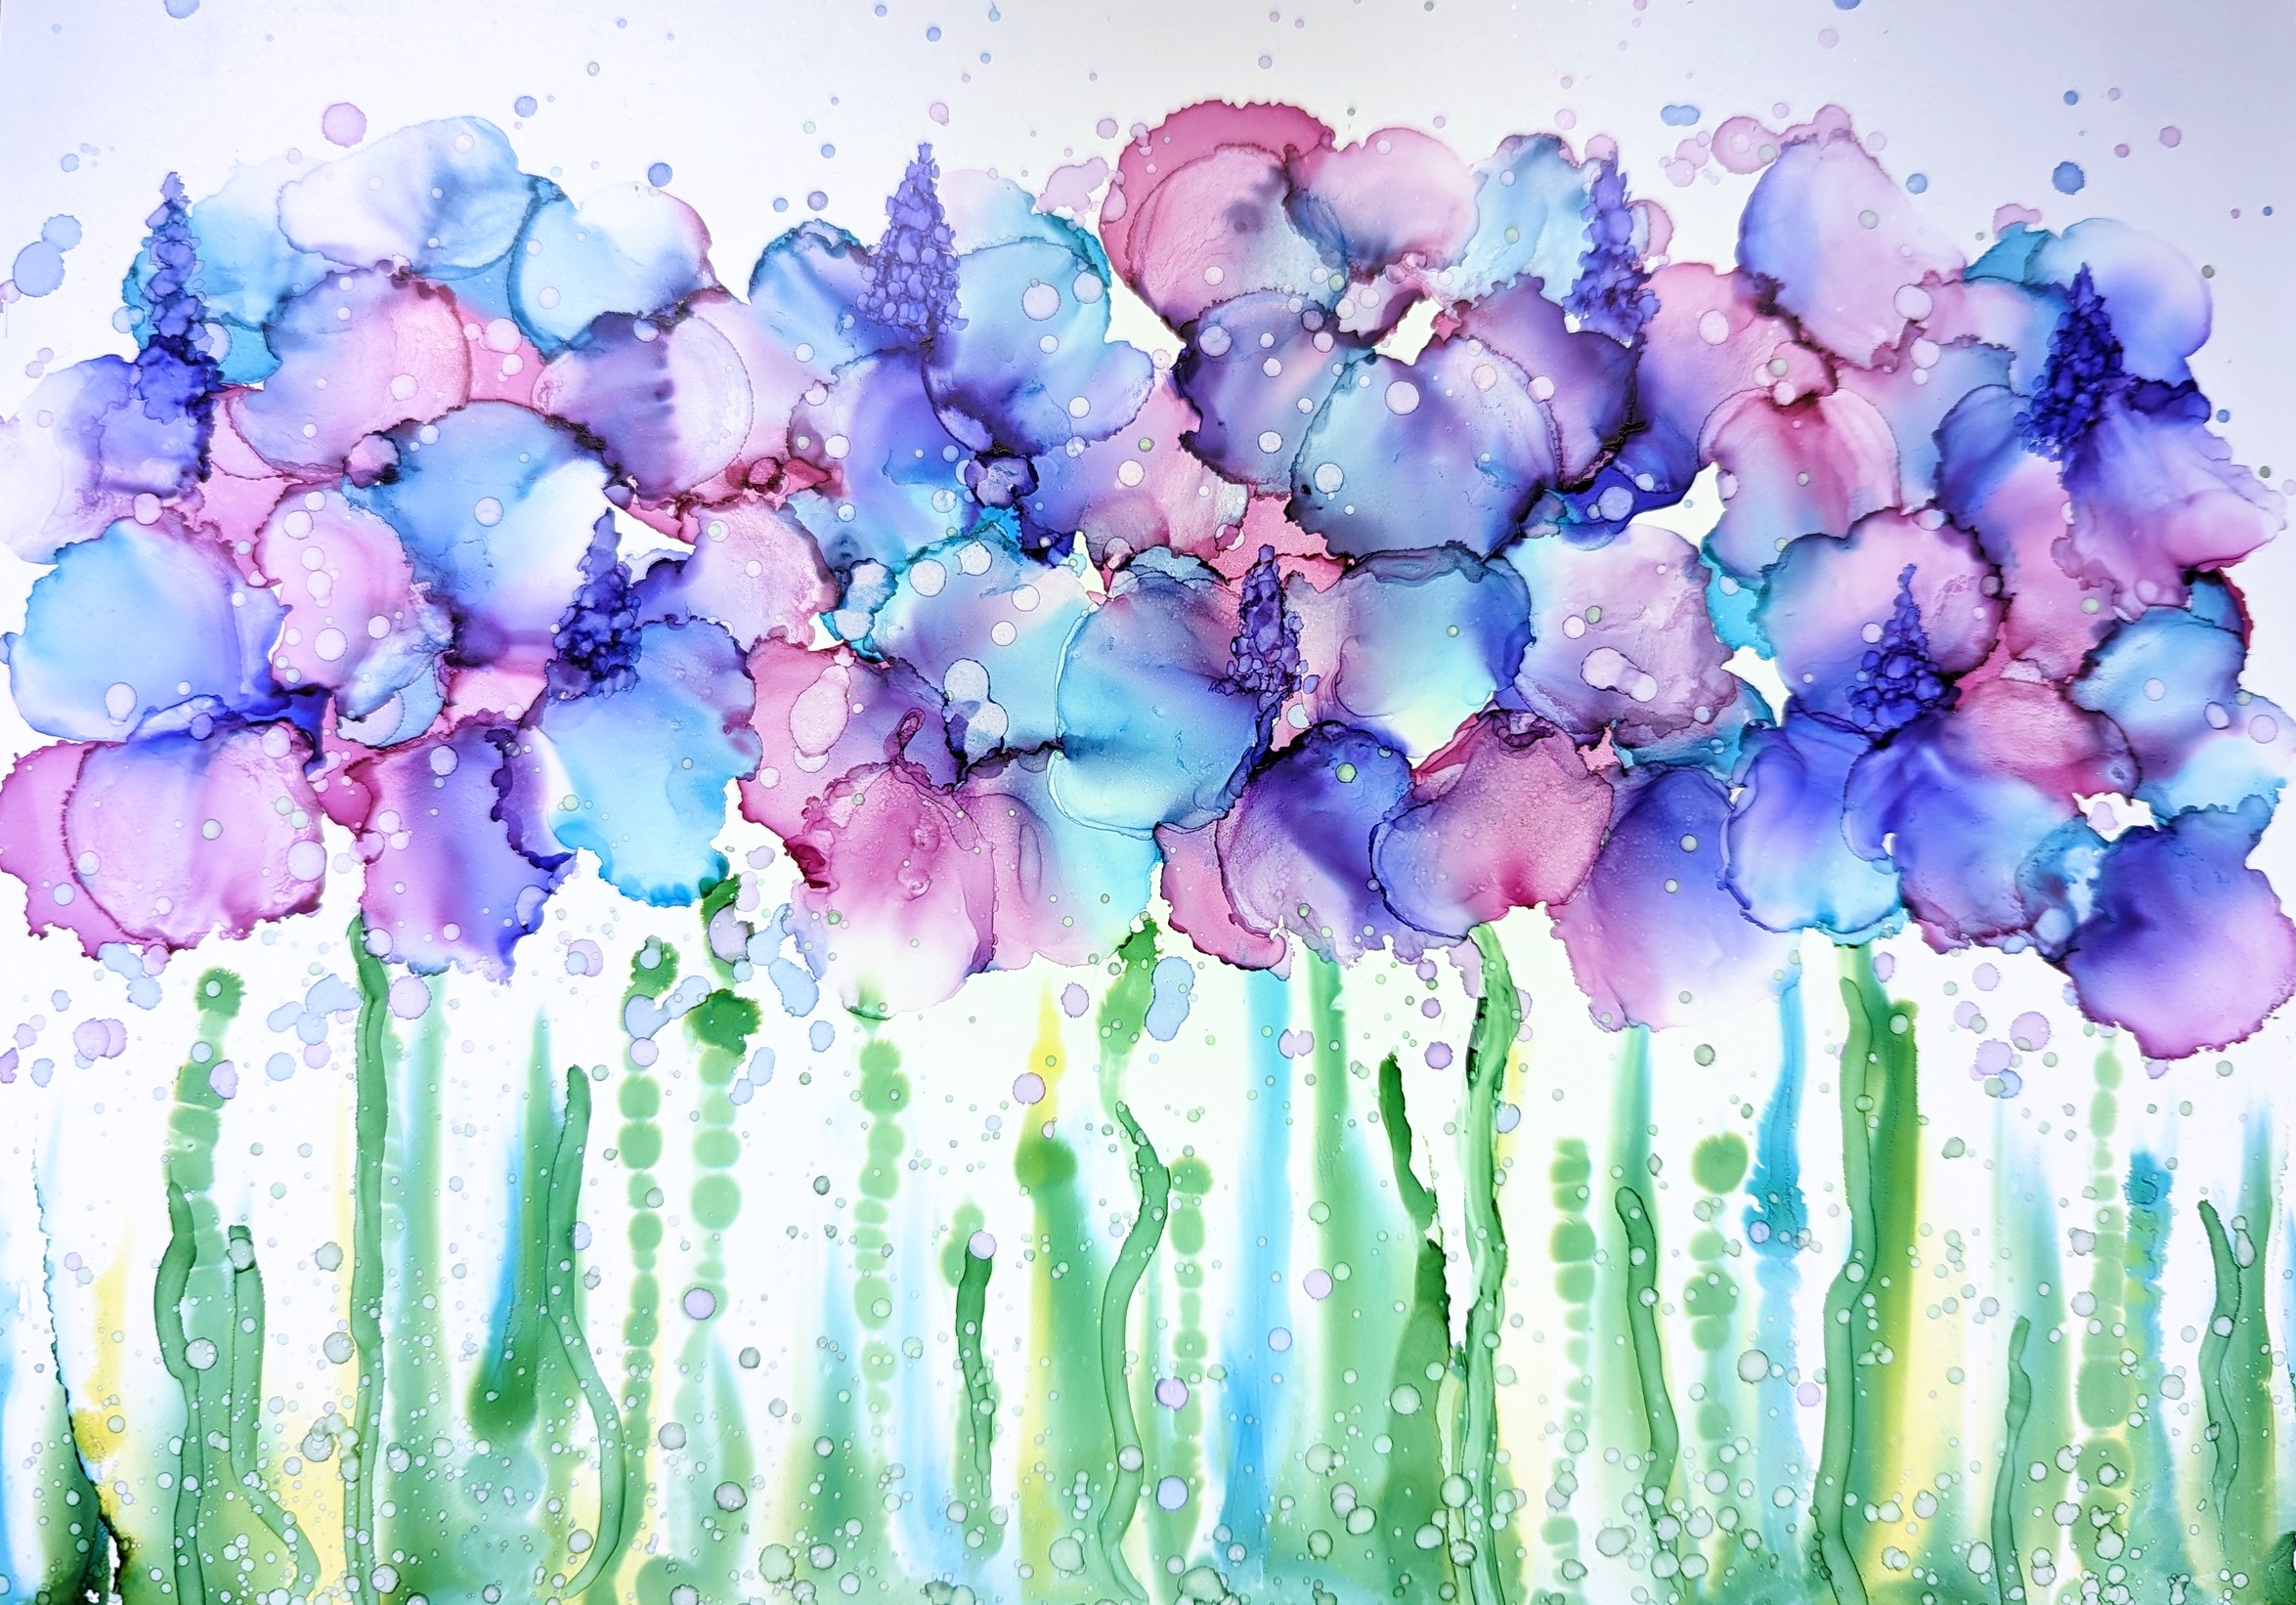 Working with Alcohol Ink - Art Supplies materials and equipment